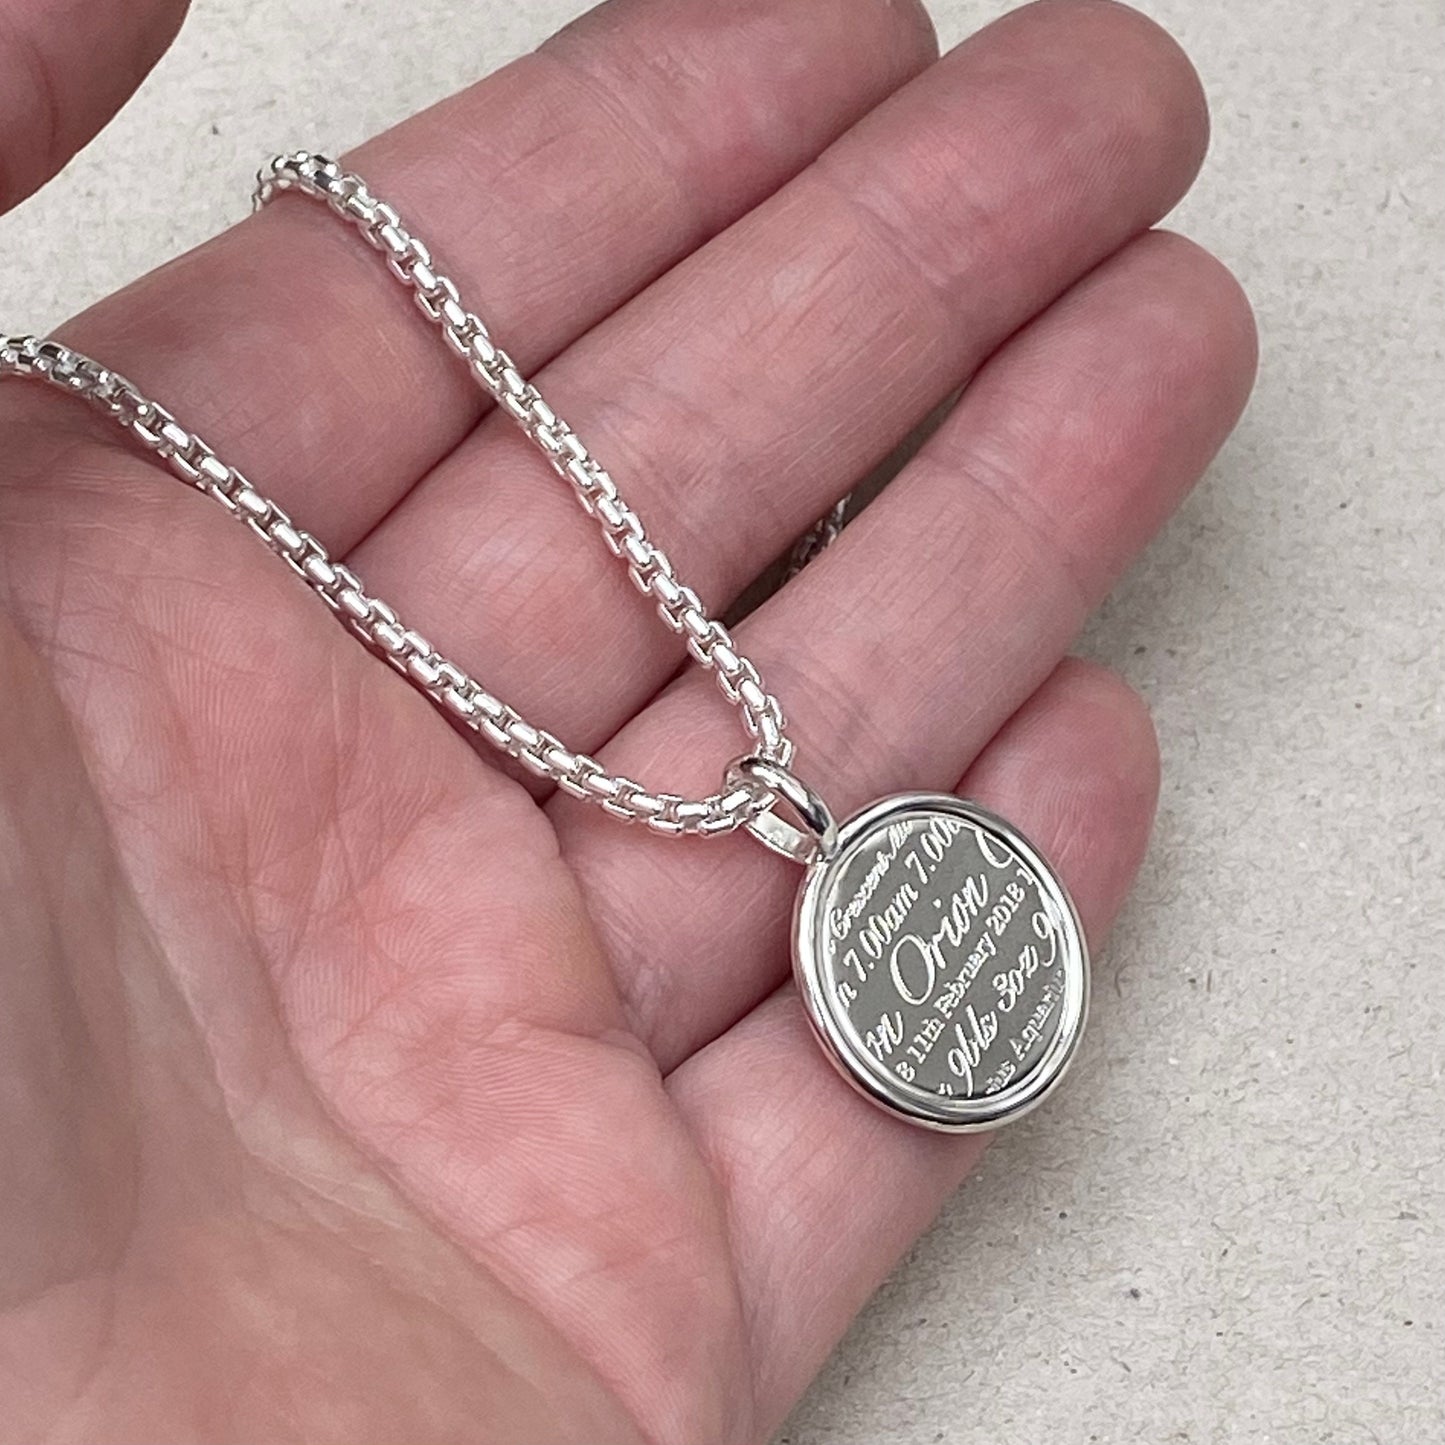 Handmade to order - Mens oxidised or polished solid silver round framed birth story pendant on a 2.5mm wide box chain